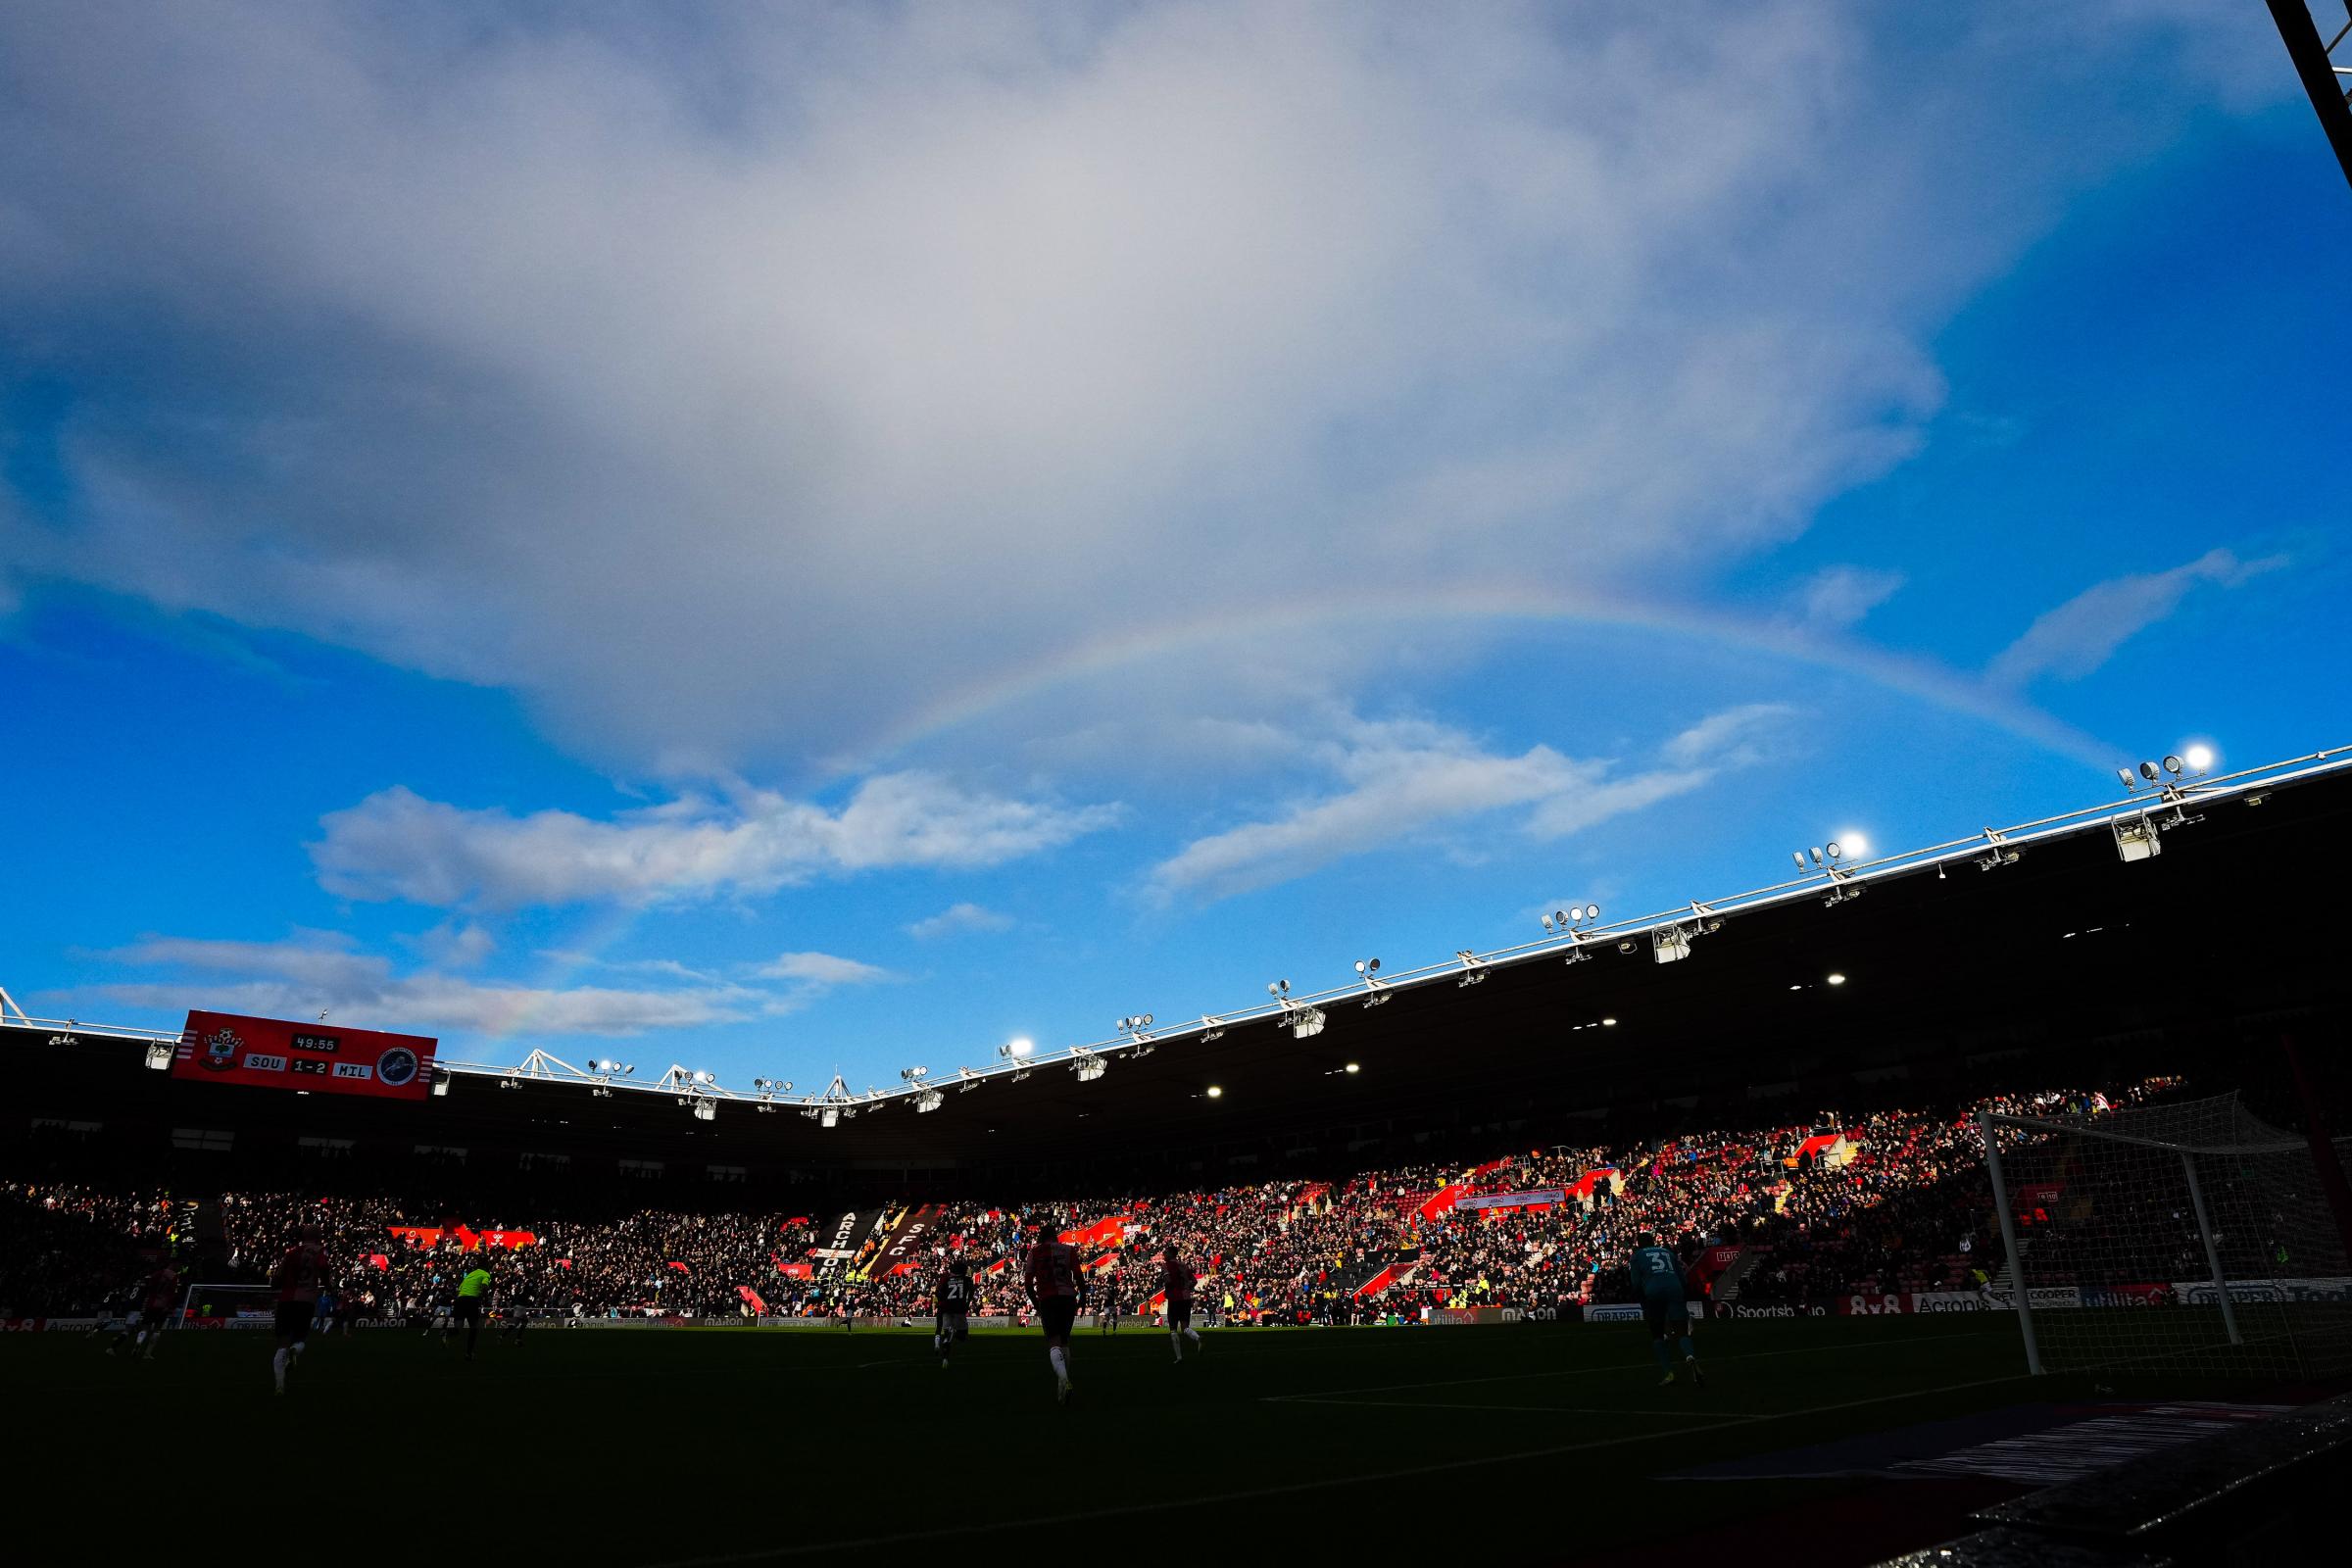 Southampton to battle two European opponents at St Mary's